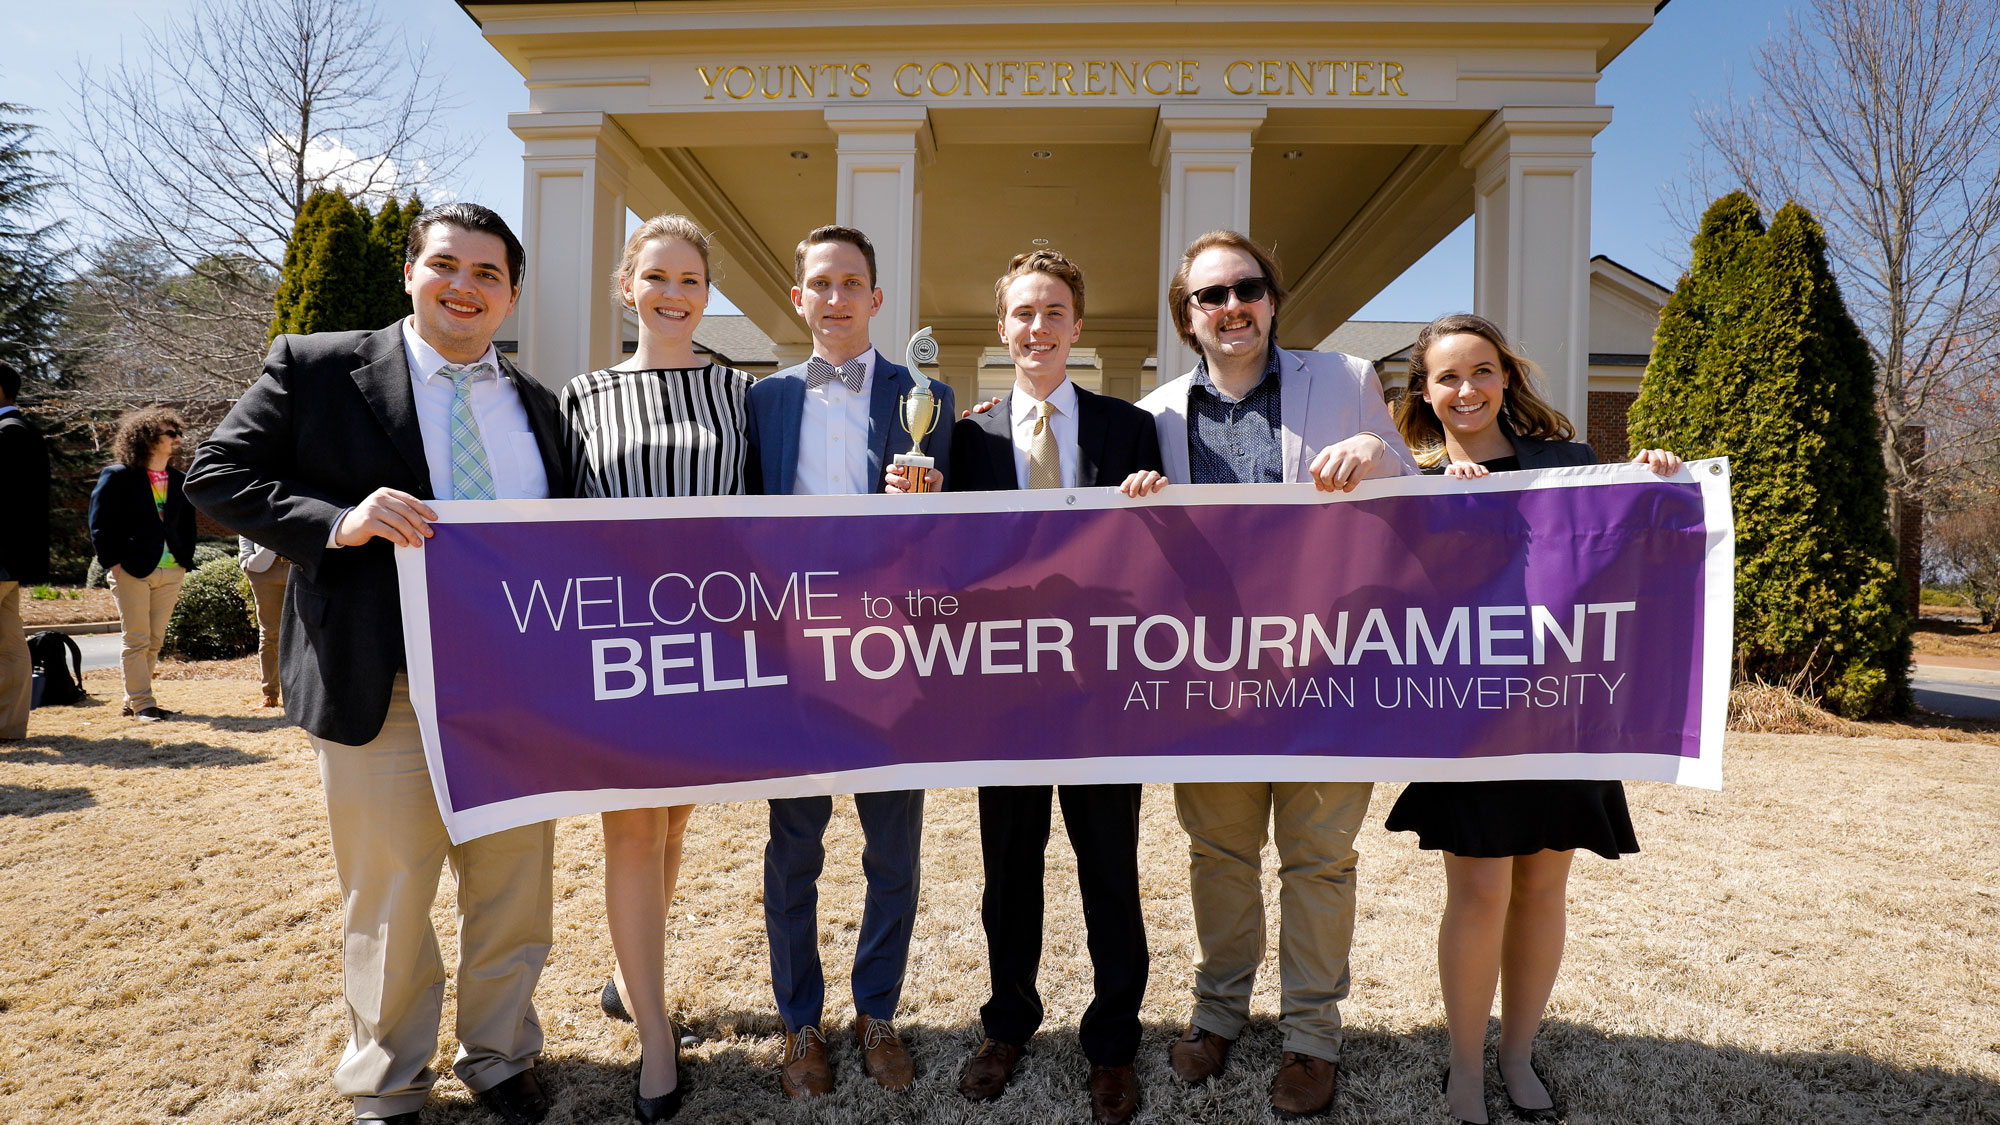 Bell Tower Tournament group photo, students are holding a banner